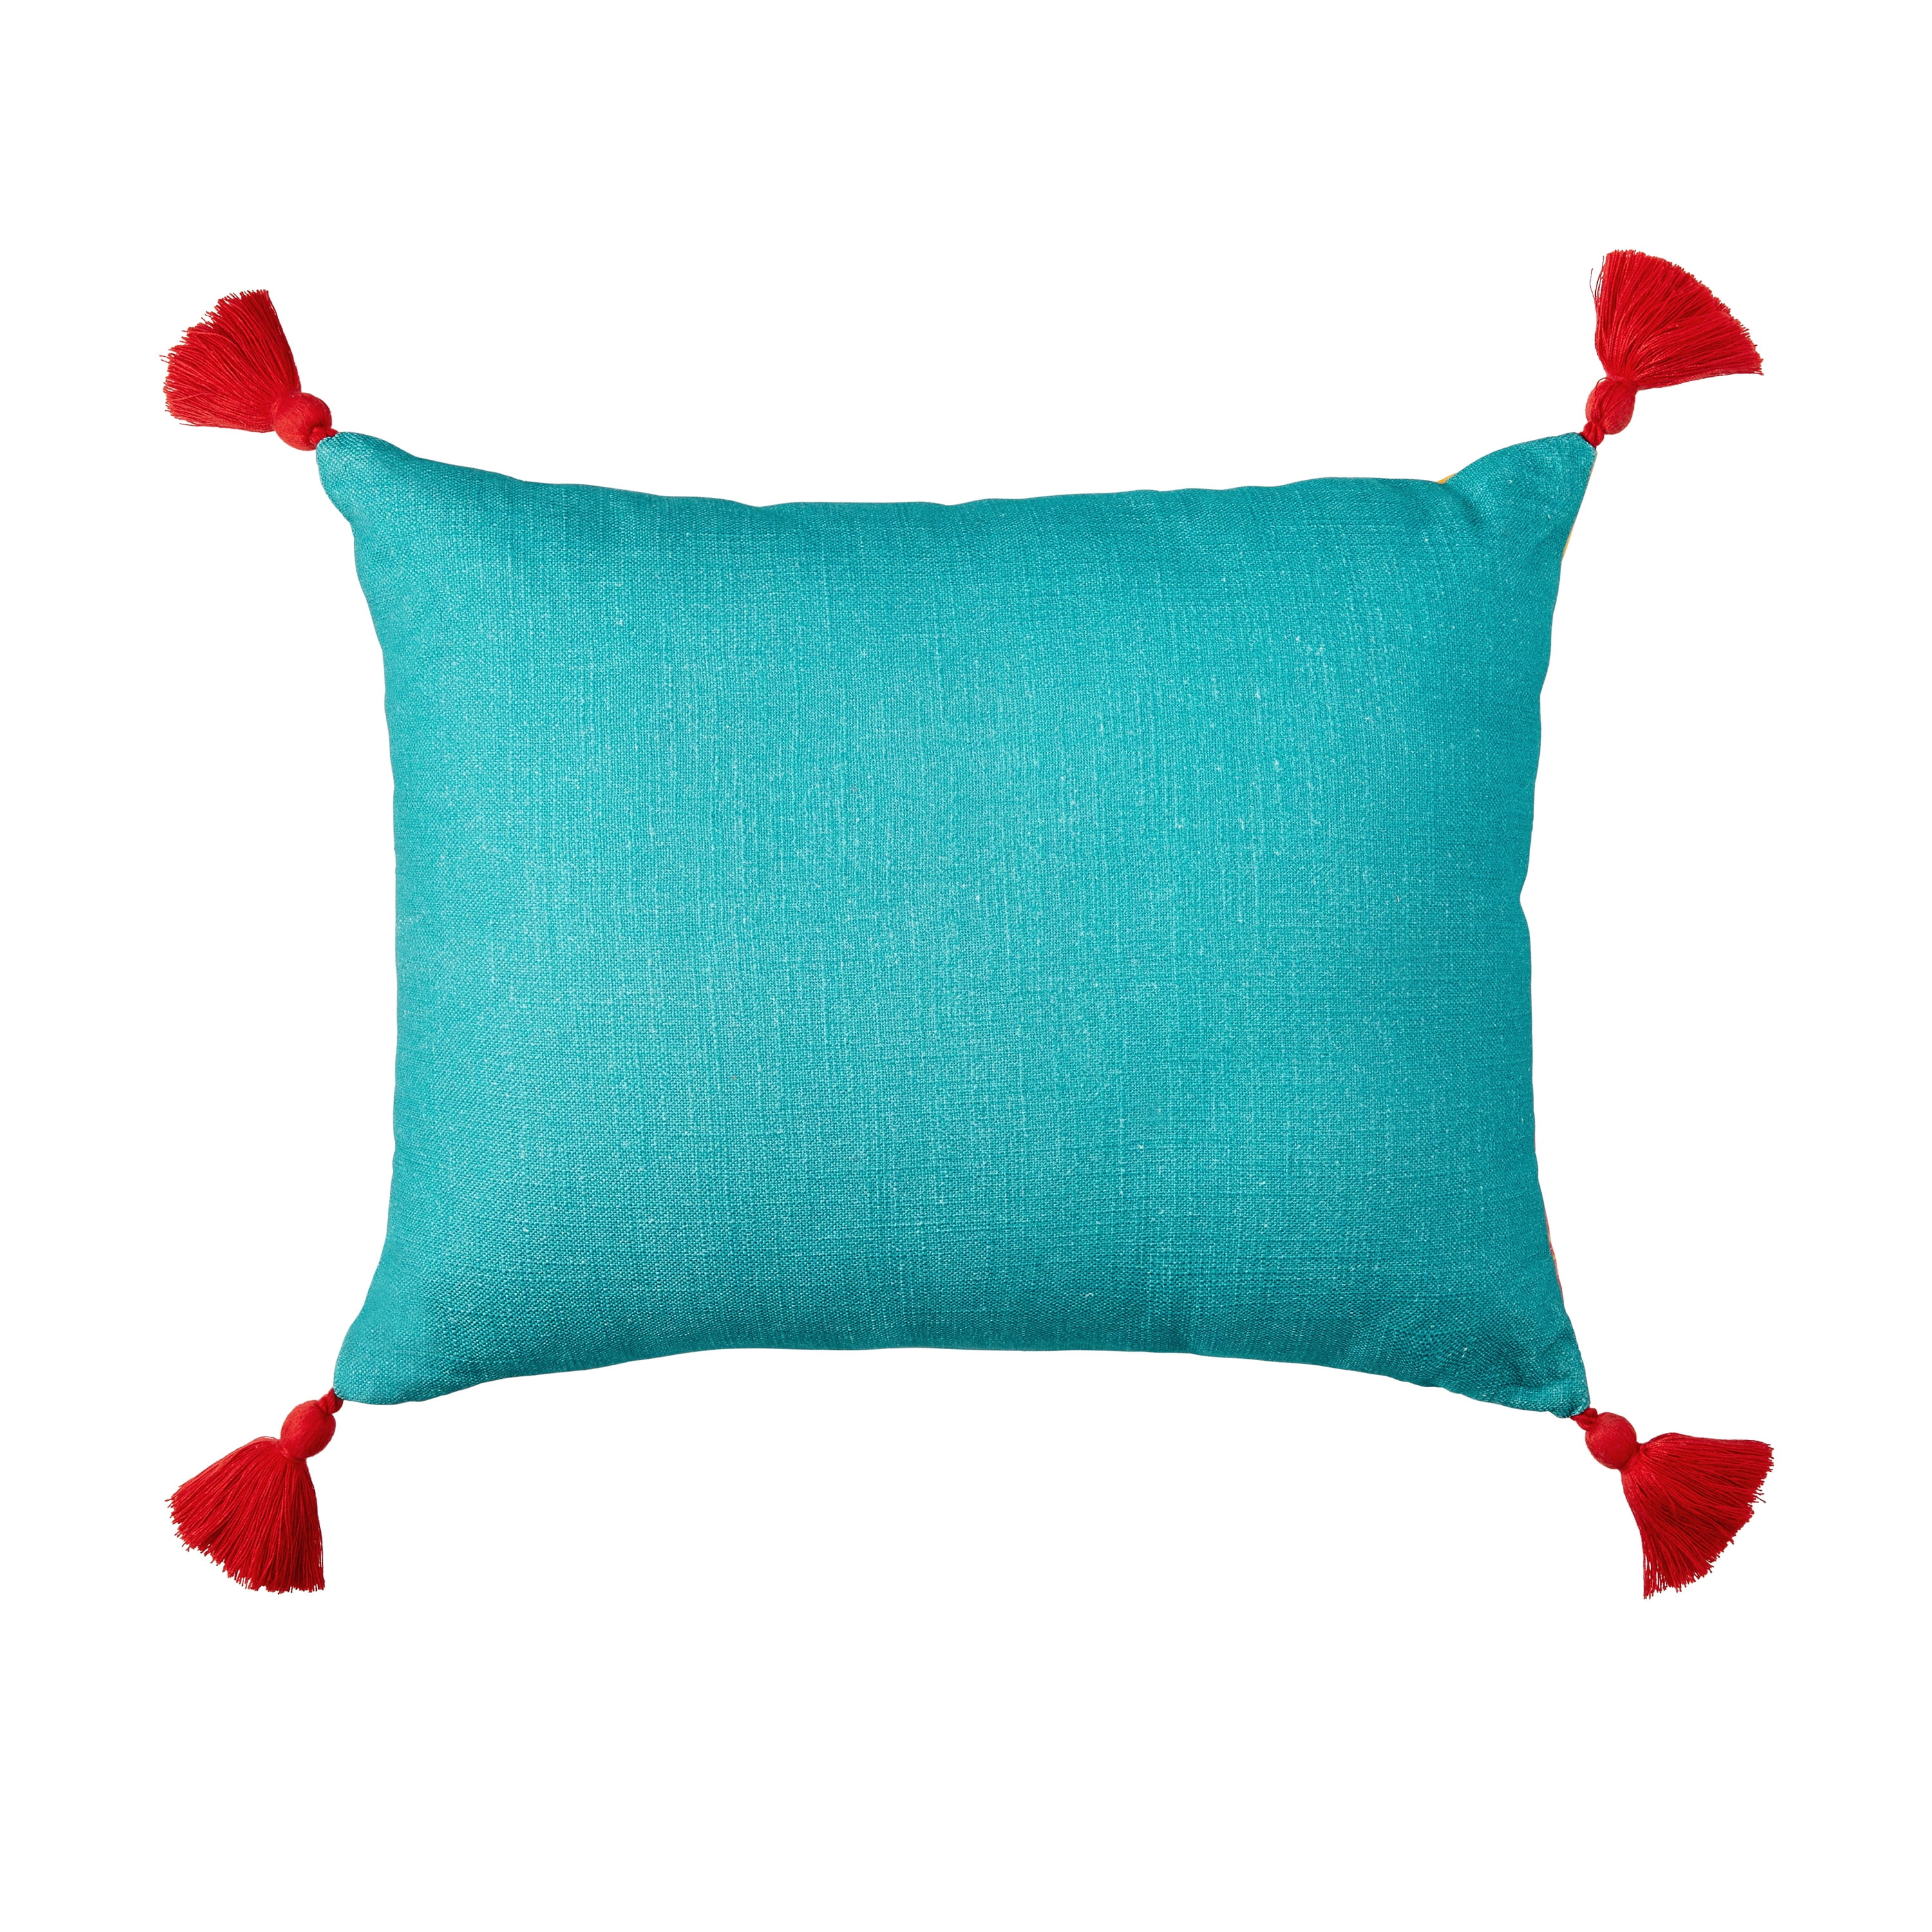 12 Decorative Pillow Types and How to Wow With Them